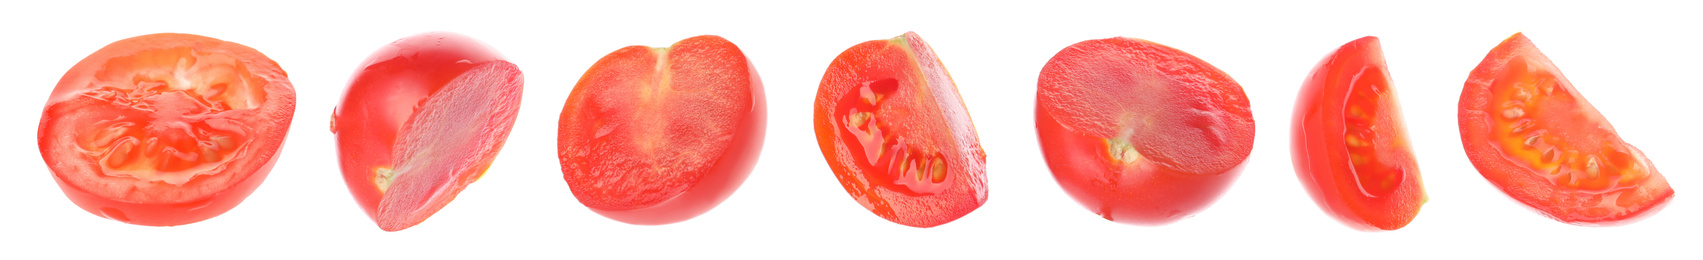 Cut cherry tomatoes on white background. Banner design